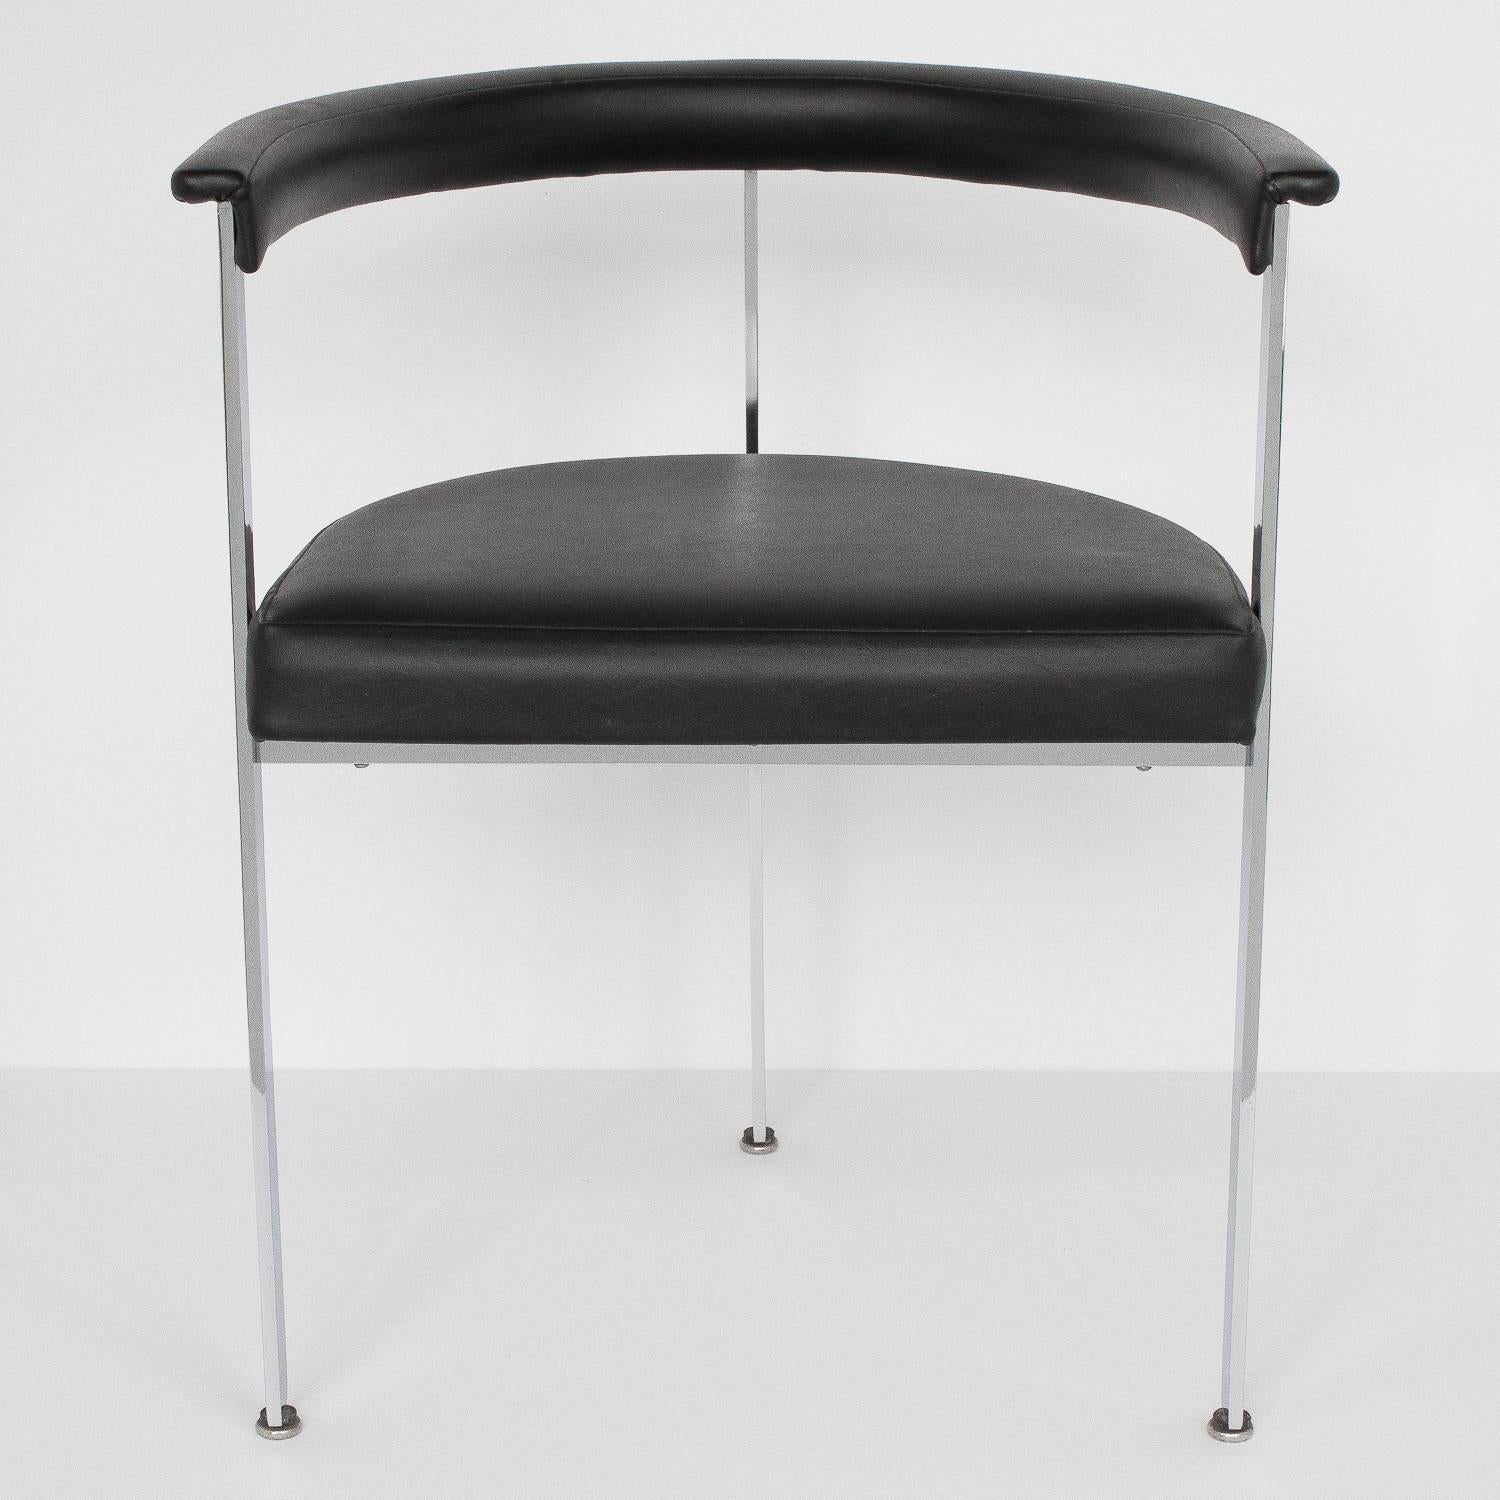 Set of four-three legged modern dining chairs. Chrome-plated solid steel construction. Measure: 1.25